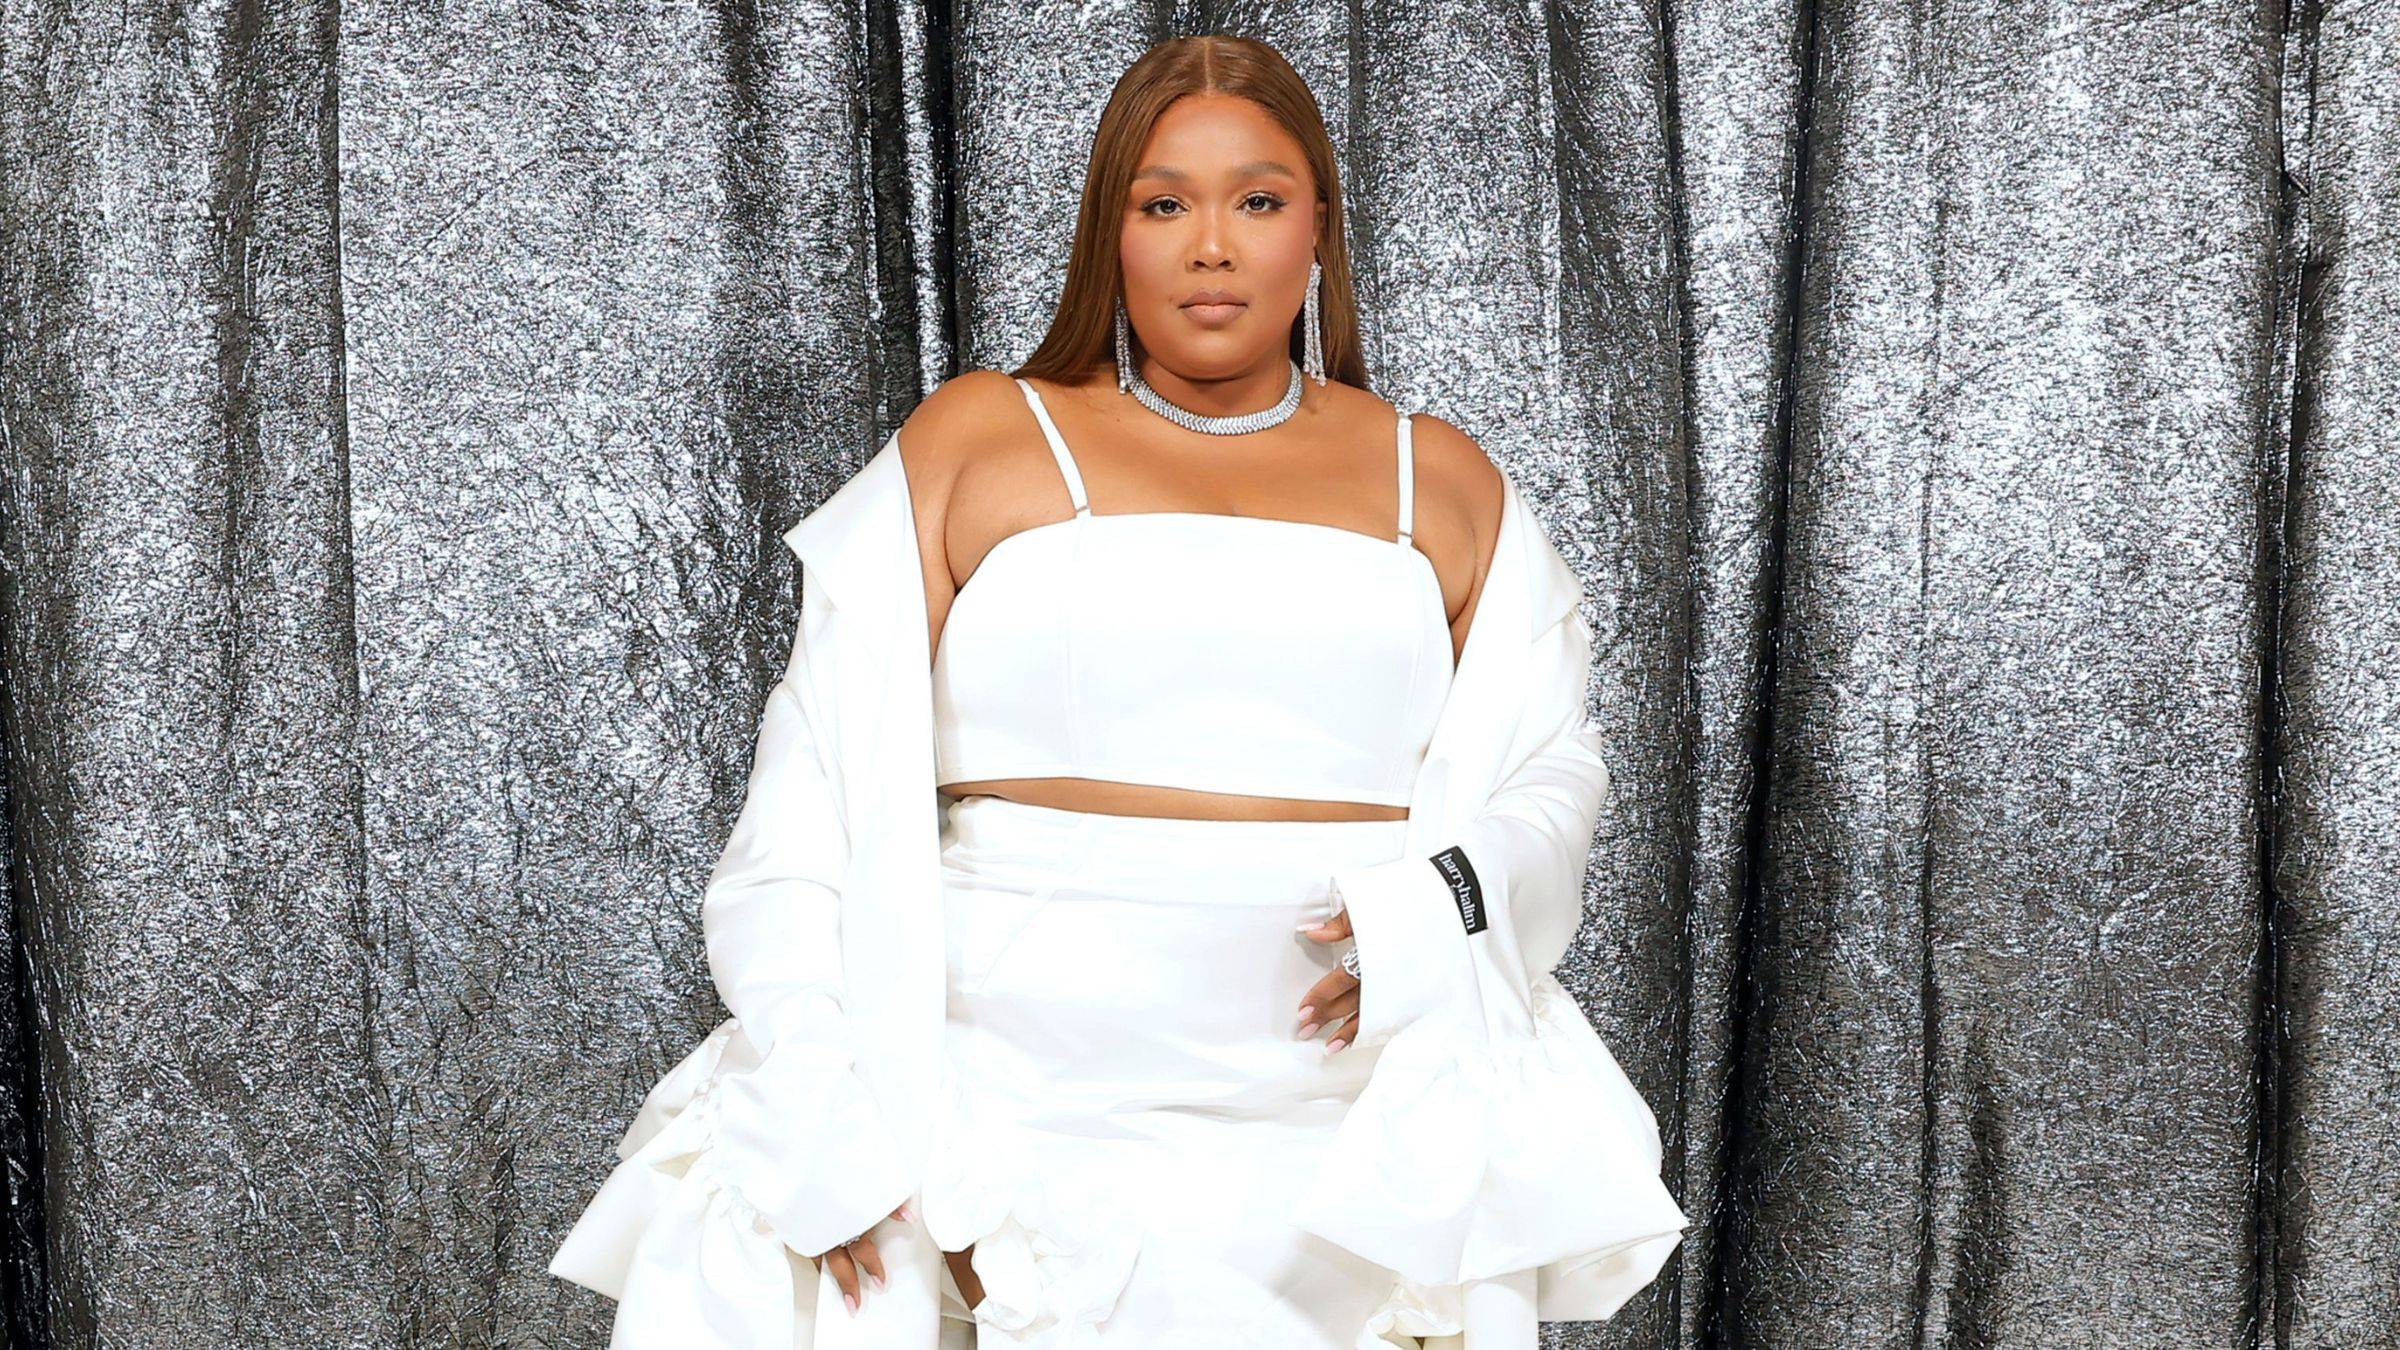 Sound The Alarm! Lizzo Shows Off Her Curves In New Yitty Merch, News